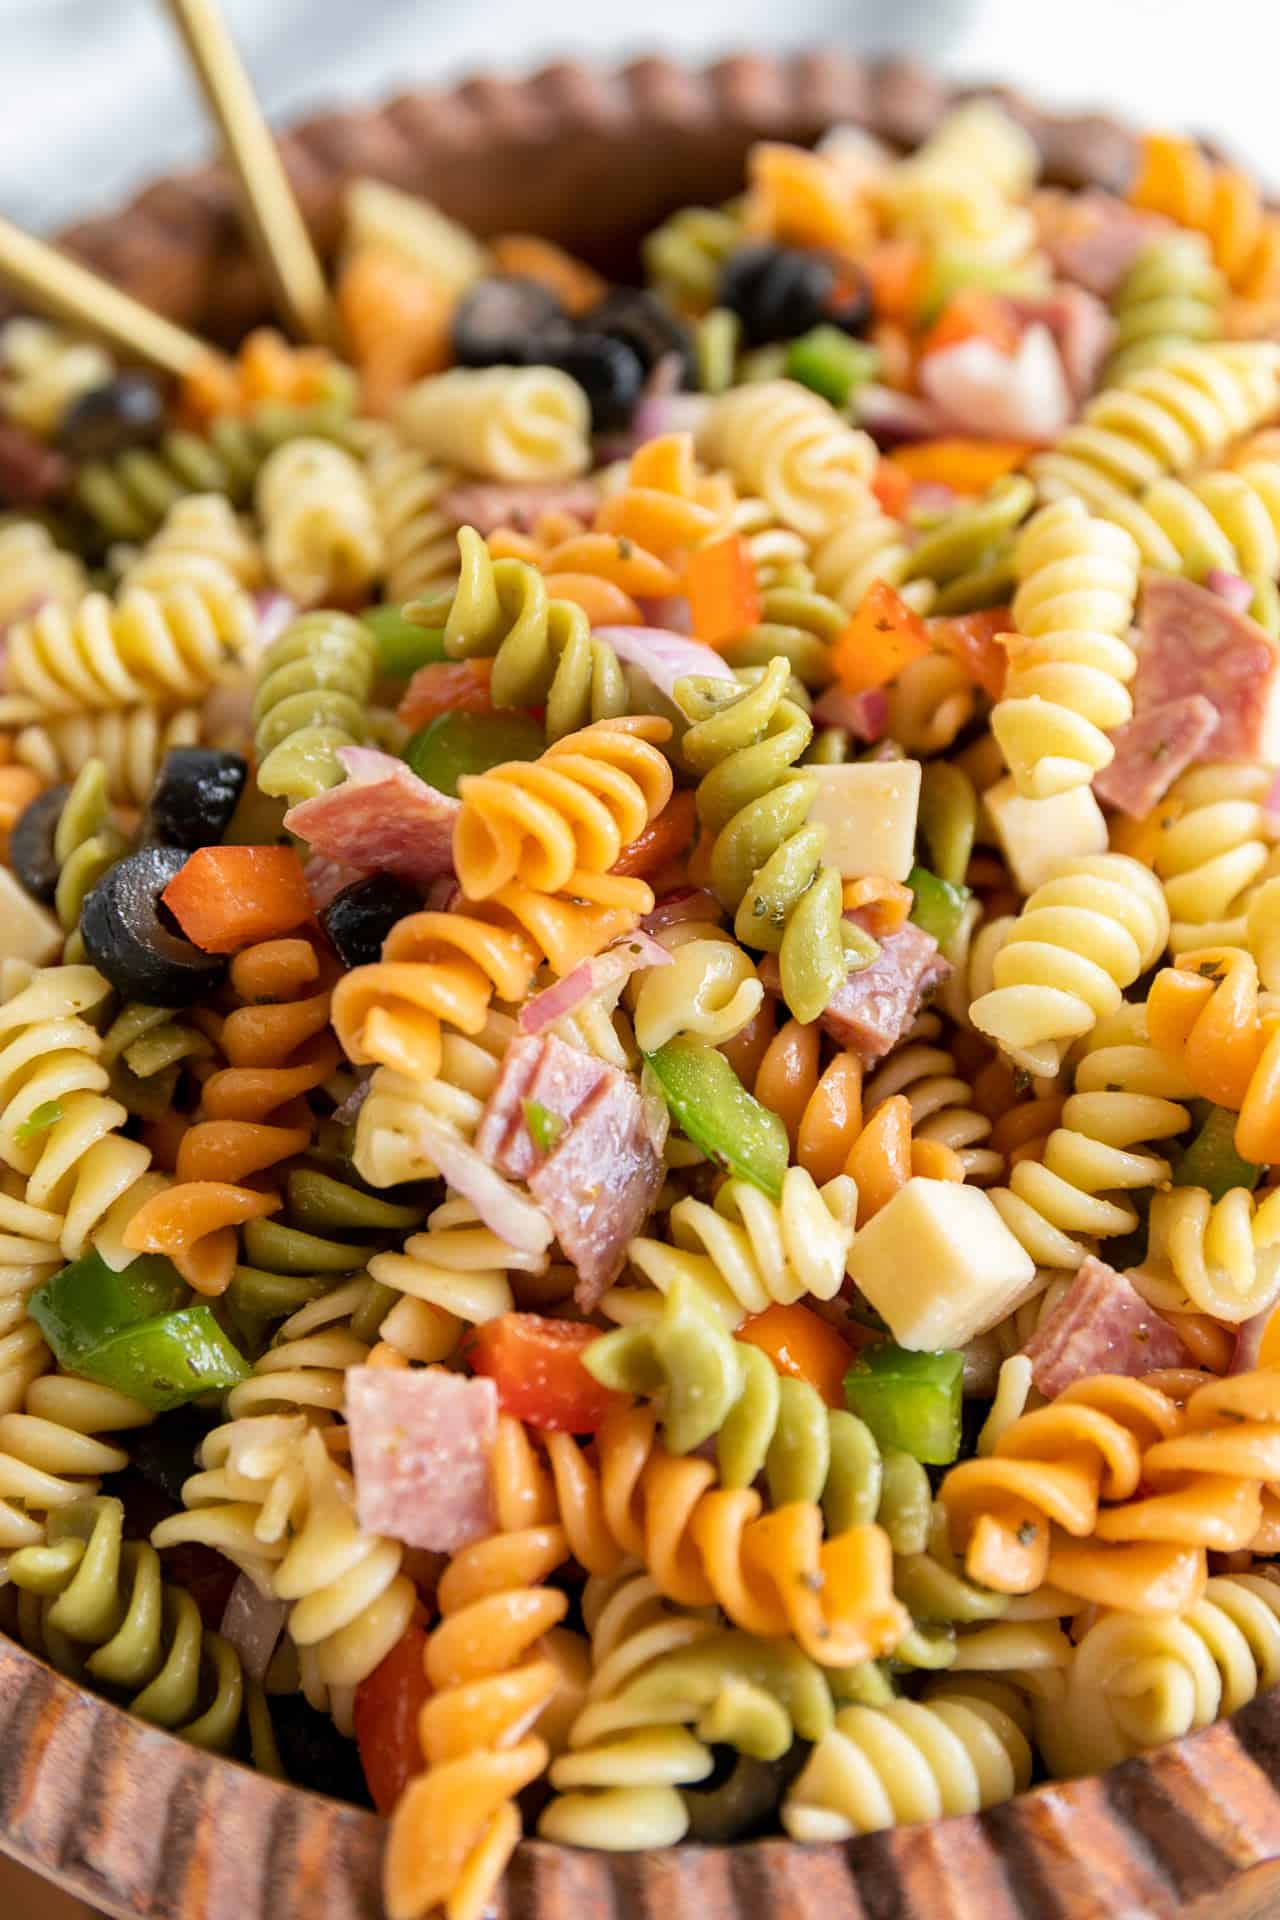 up close ready to serve Antipasto Pasta Salad up close with gold serving spoons in a wood bowl